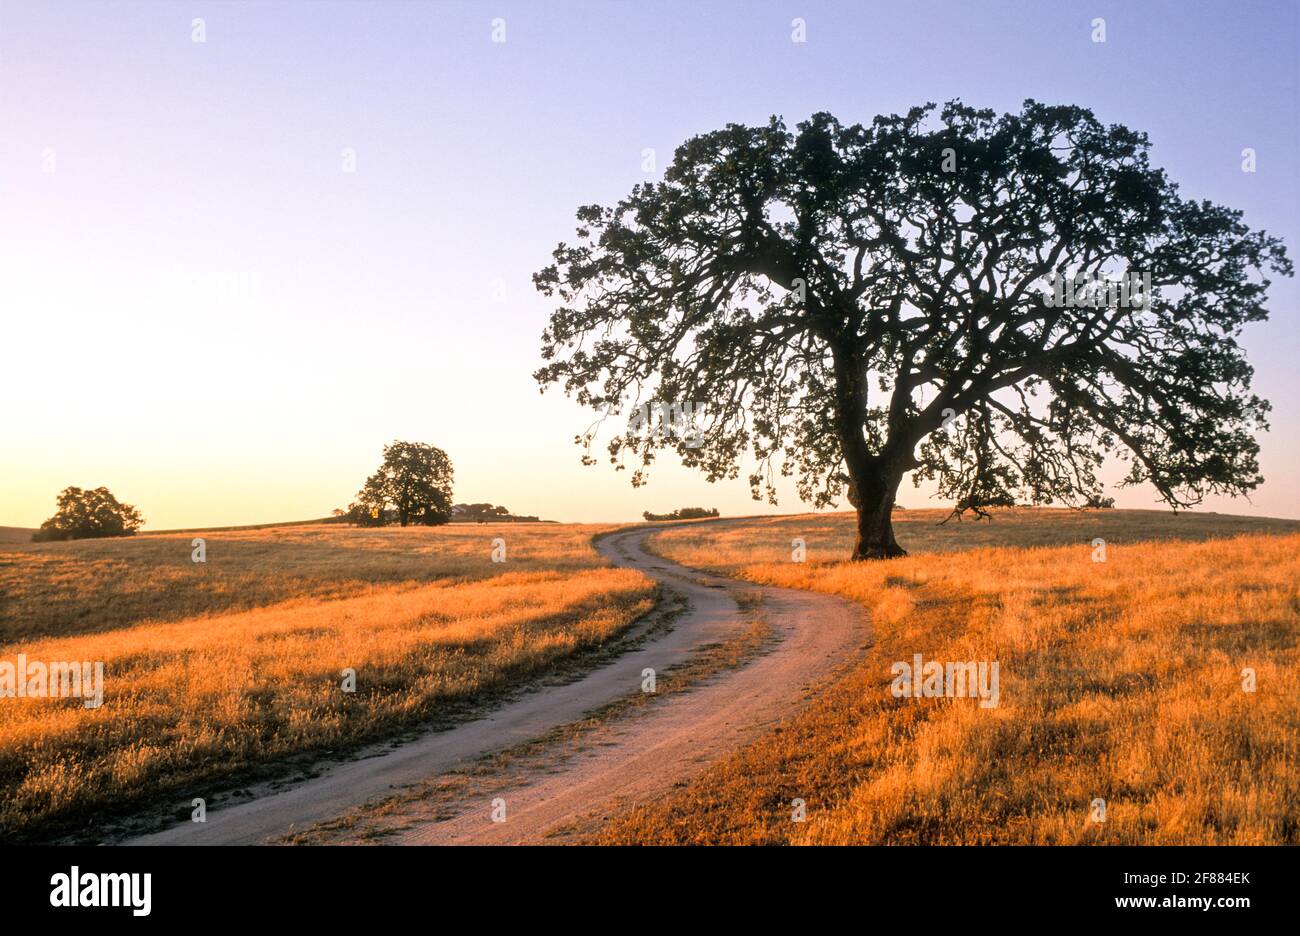 USA California, Paso Robles, Oak tree and dirt road curving through a field at dawn Stock Photo